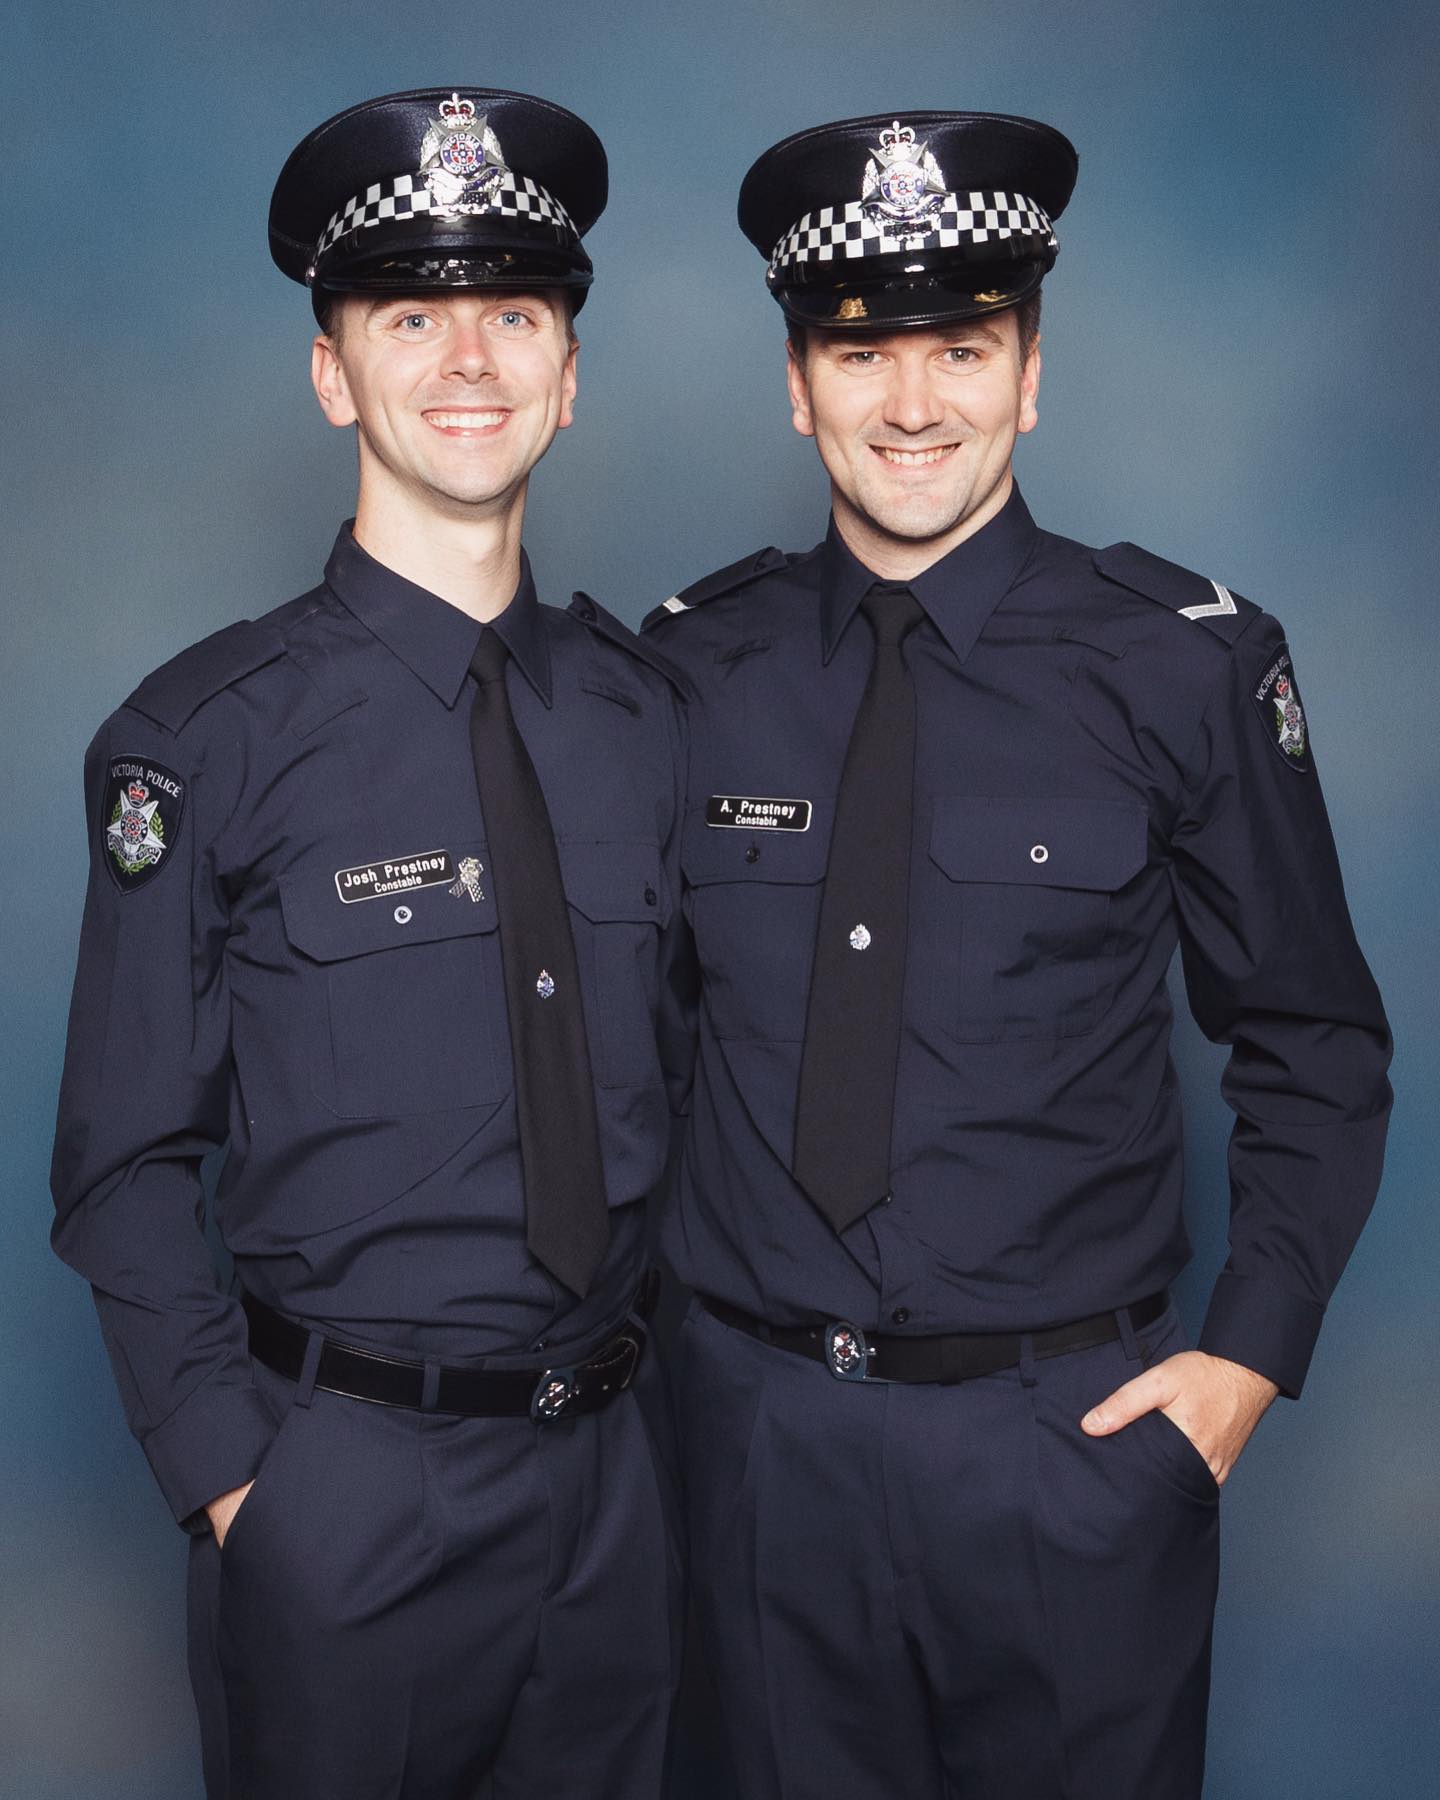 Two happy young men in police uniforms.